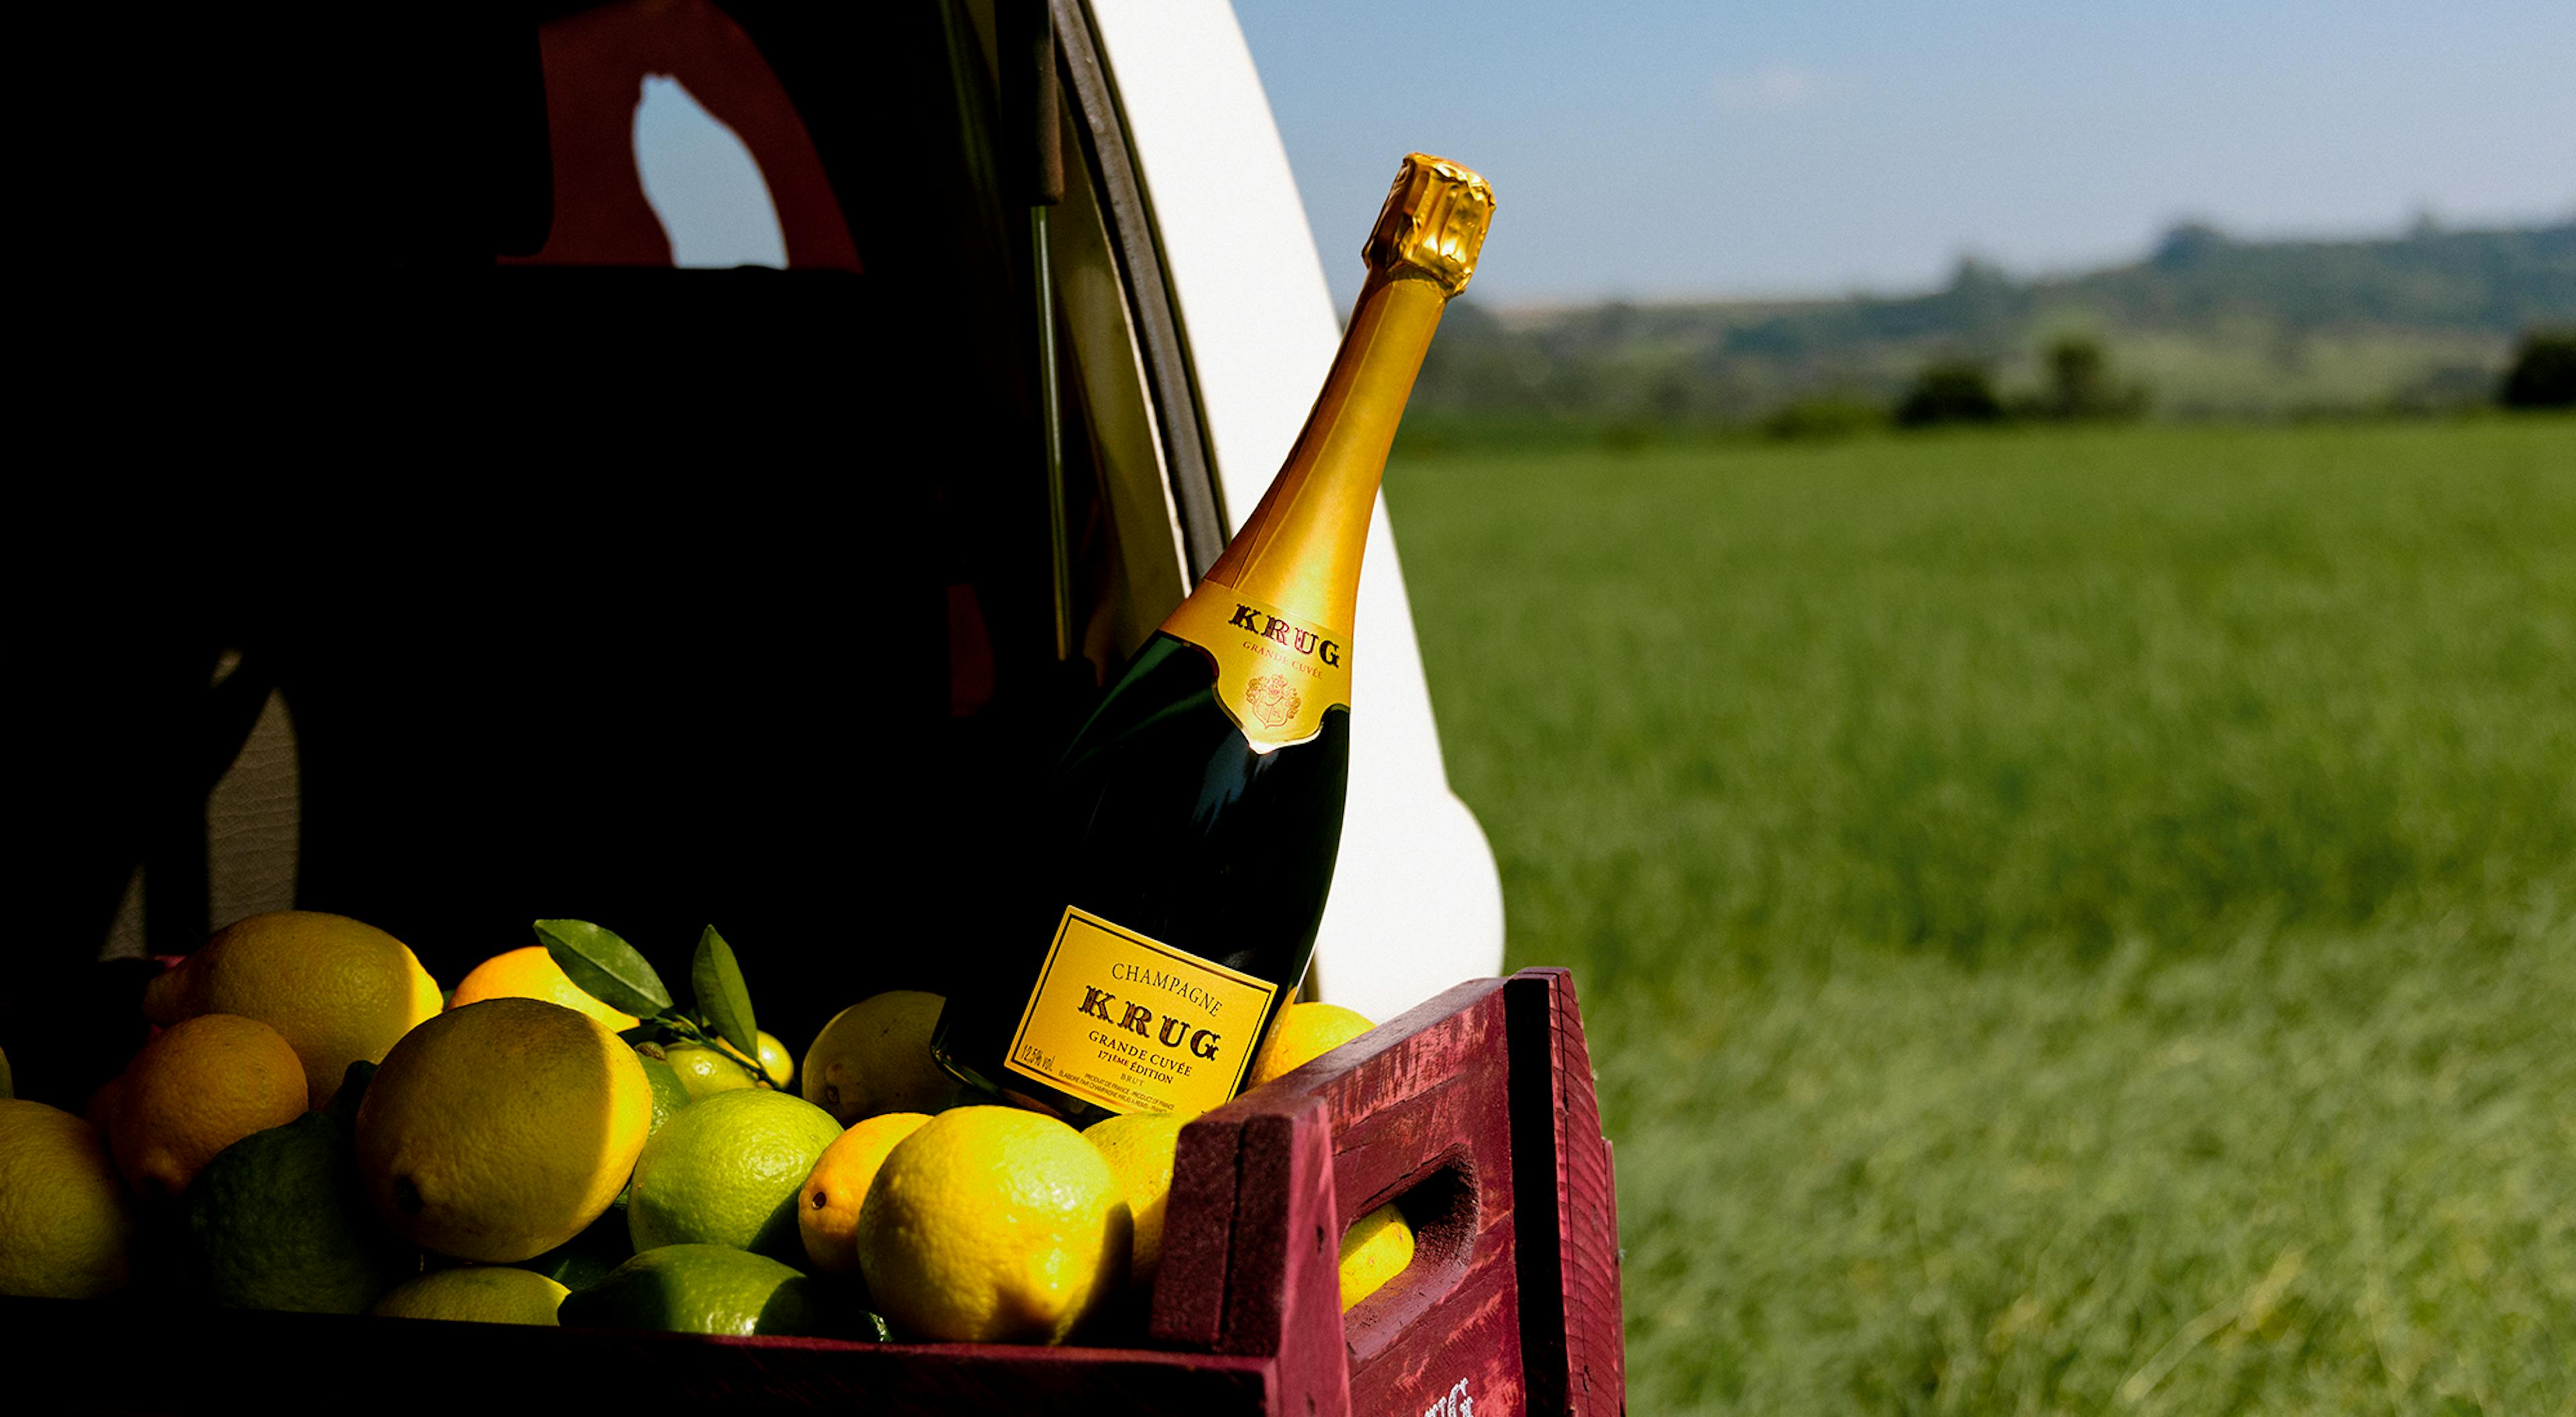 Cover - Krug journeys to Brazil, bringing together 12 chefs to create remarkable pairings between lemon and Krug champagnes